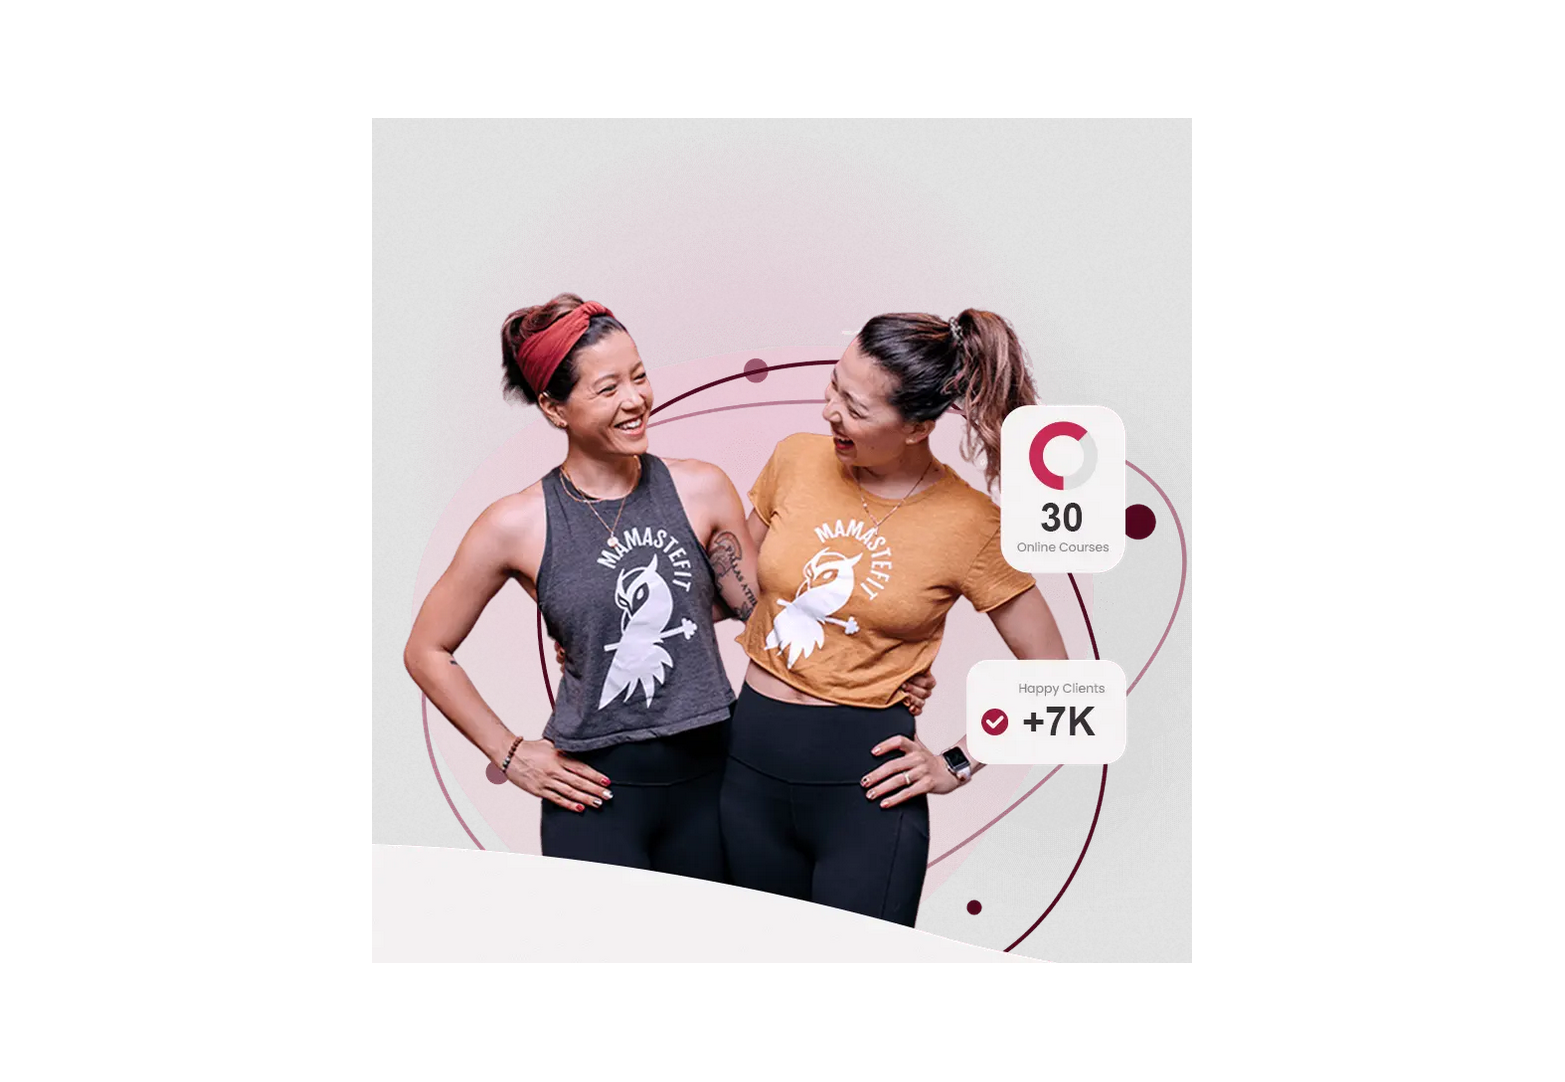 Empowering Pregnancy and Beyond: The MamasteFit Journey by Gina Conley and Roxanne Albert